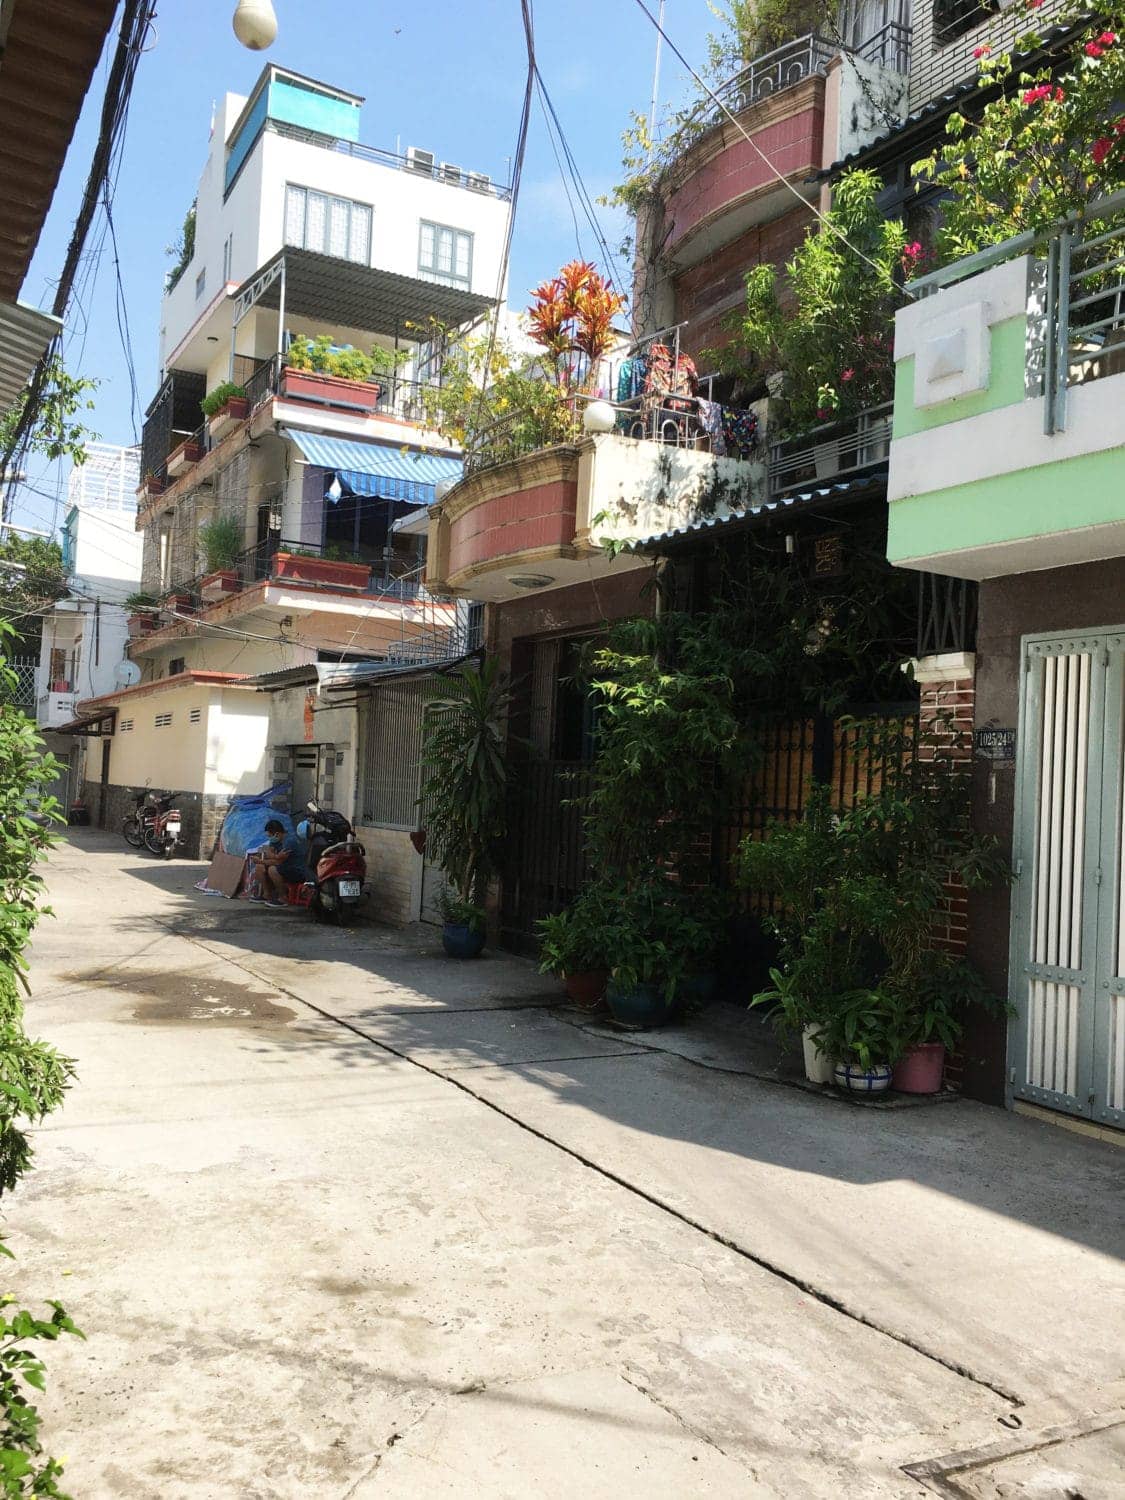 Tan-Binh-District-Ward-7-Ho-Chi-Minh-City-typical-middle-to-low-income-residential-district-during-coronavirus-lockdown-042320-by-©Le-Thi-Xuan-Ninh, Viet Nam vs. COVID-19: How one small nation defeated a global enemy, World News & Views 